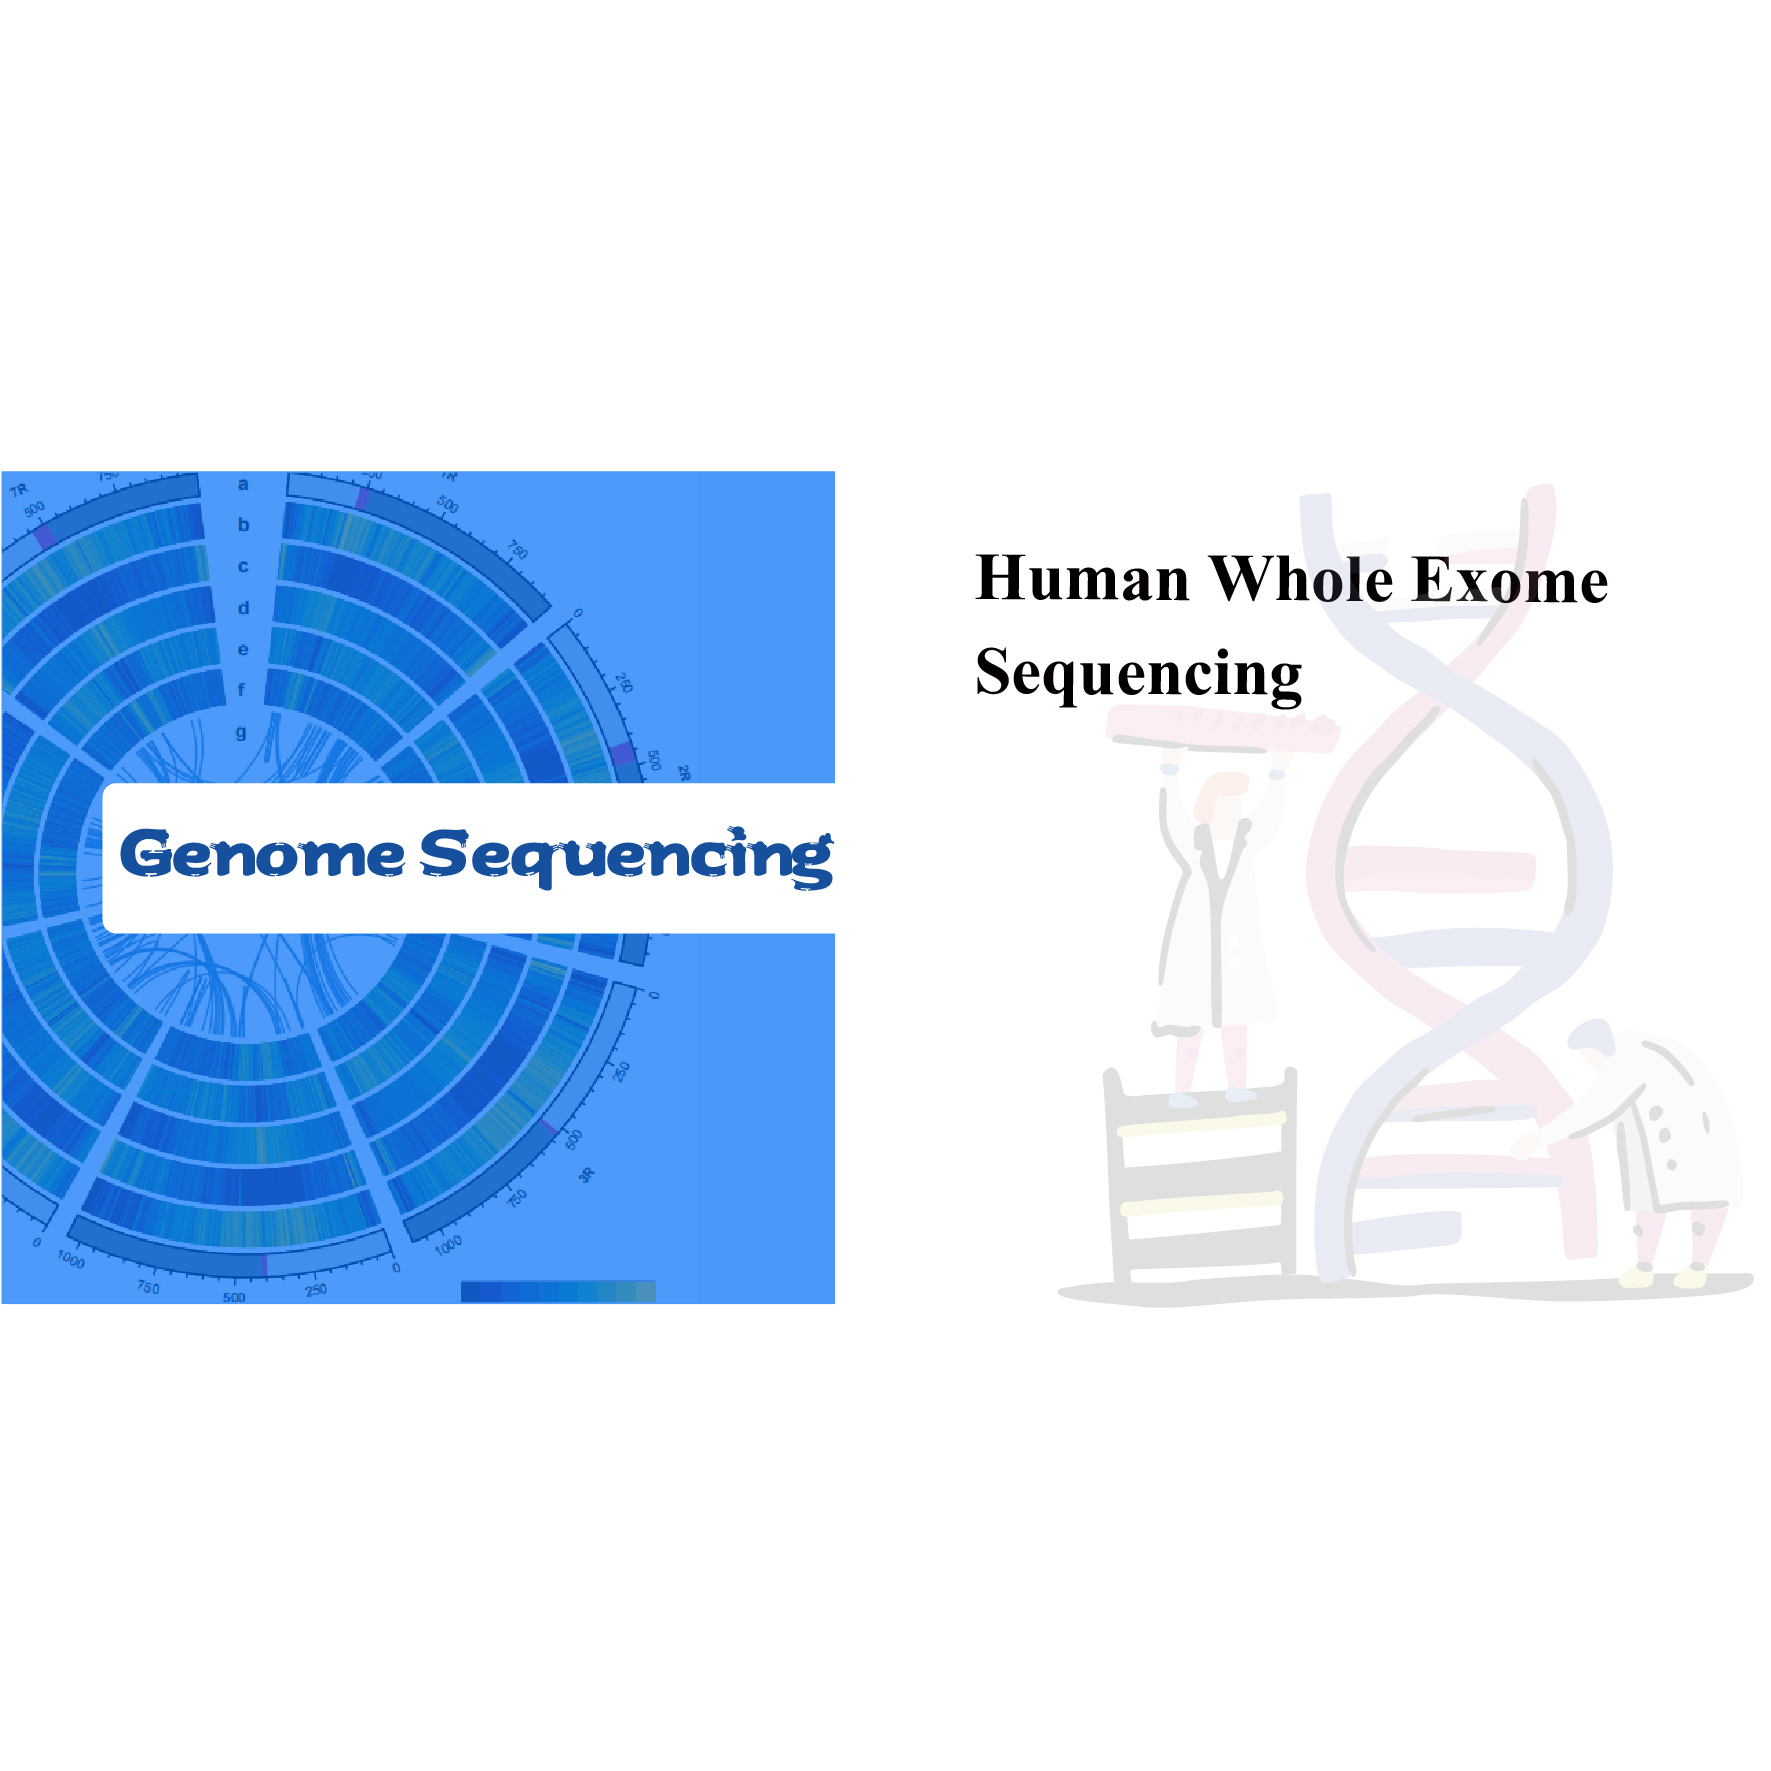 Human Whole Exome Sequencing